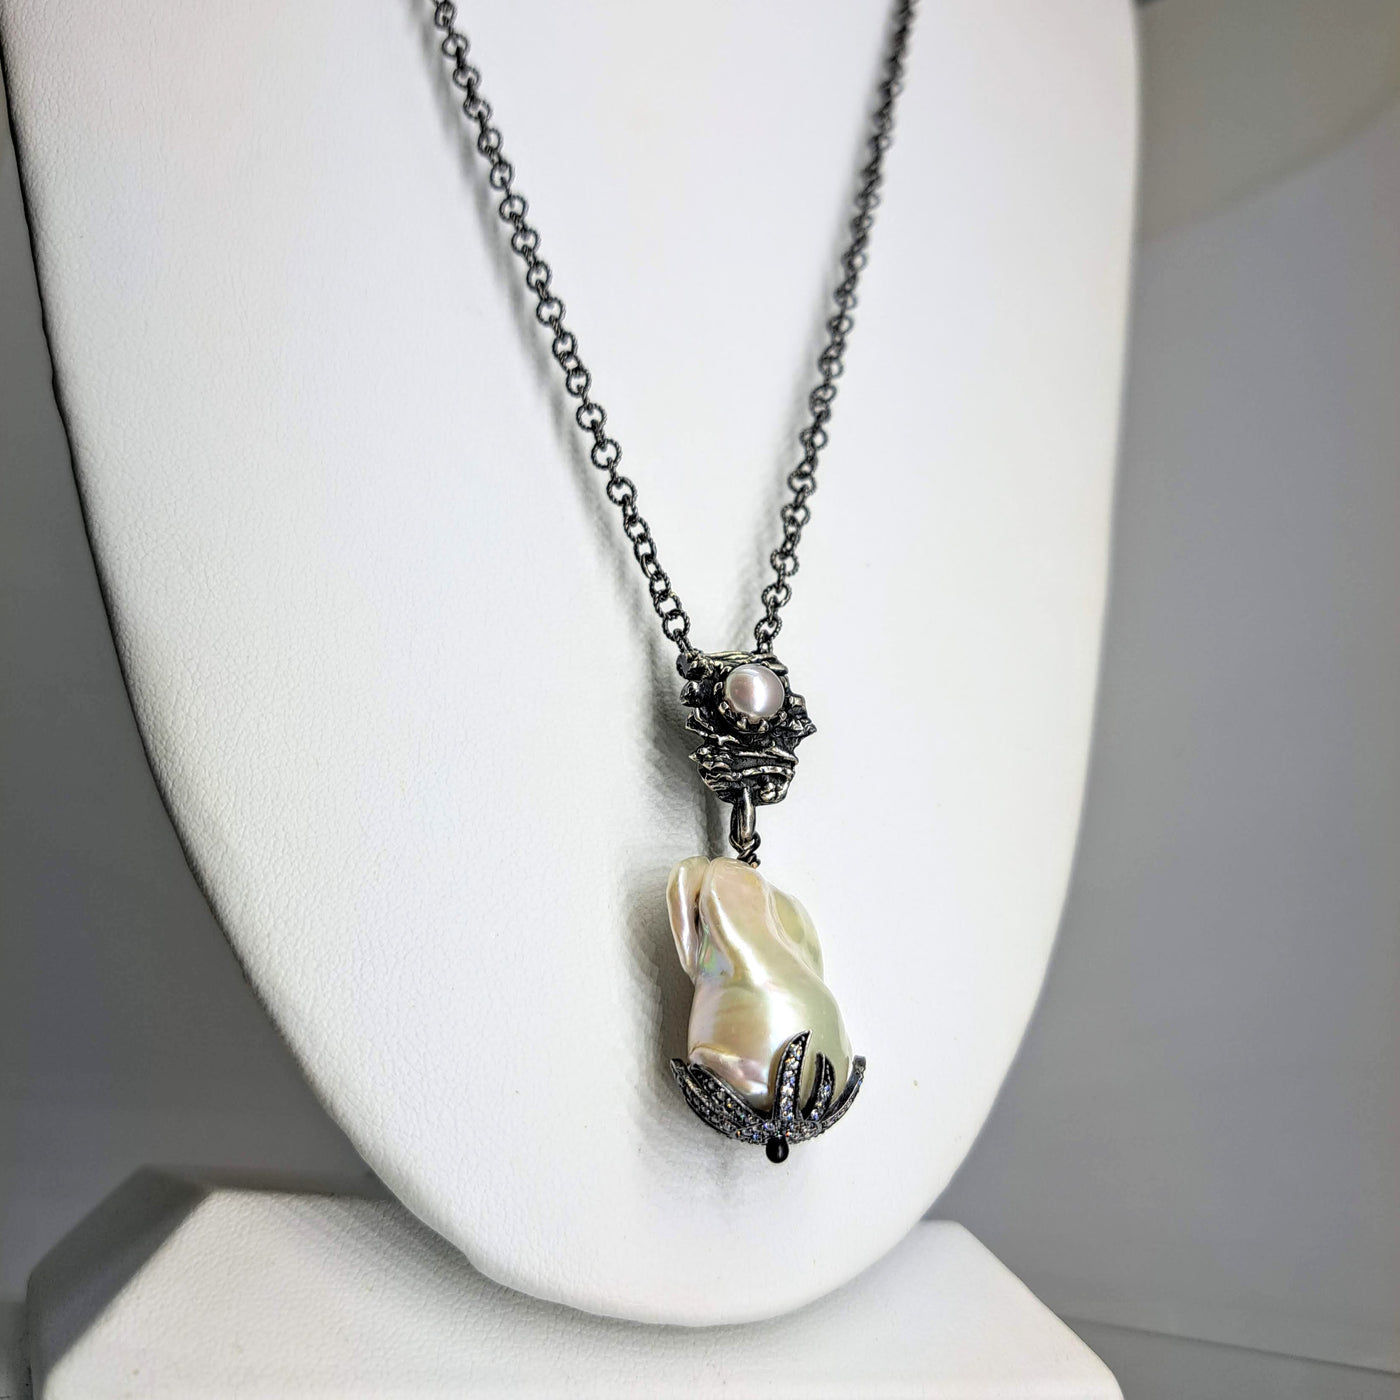 "Baroque & Lovely" Pendant Necklace - Baroque Pearl, Oxidized Sterling